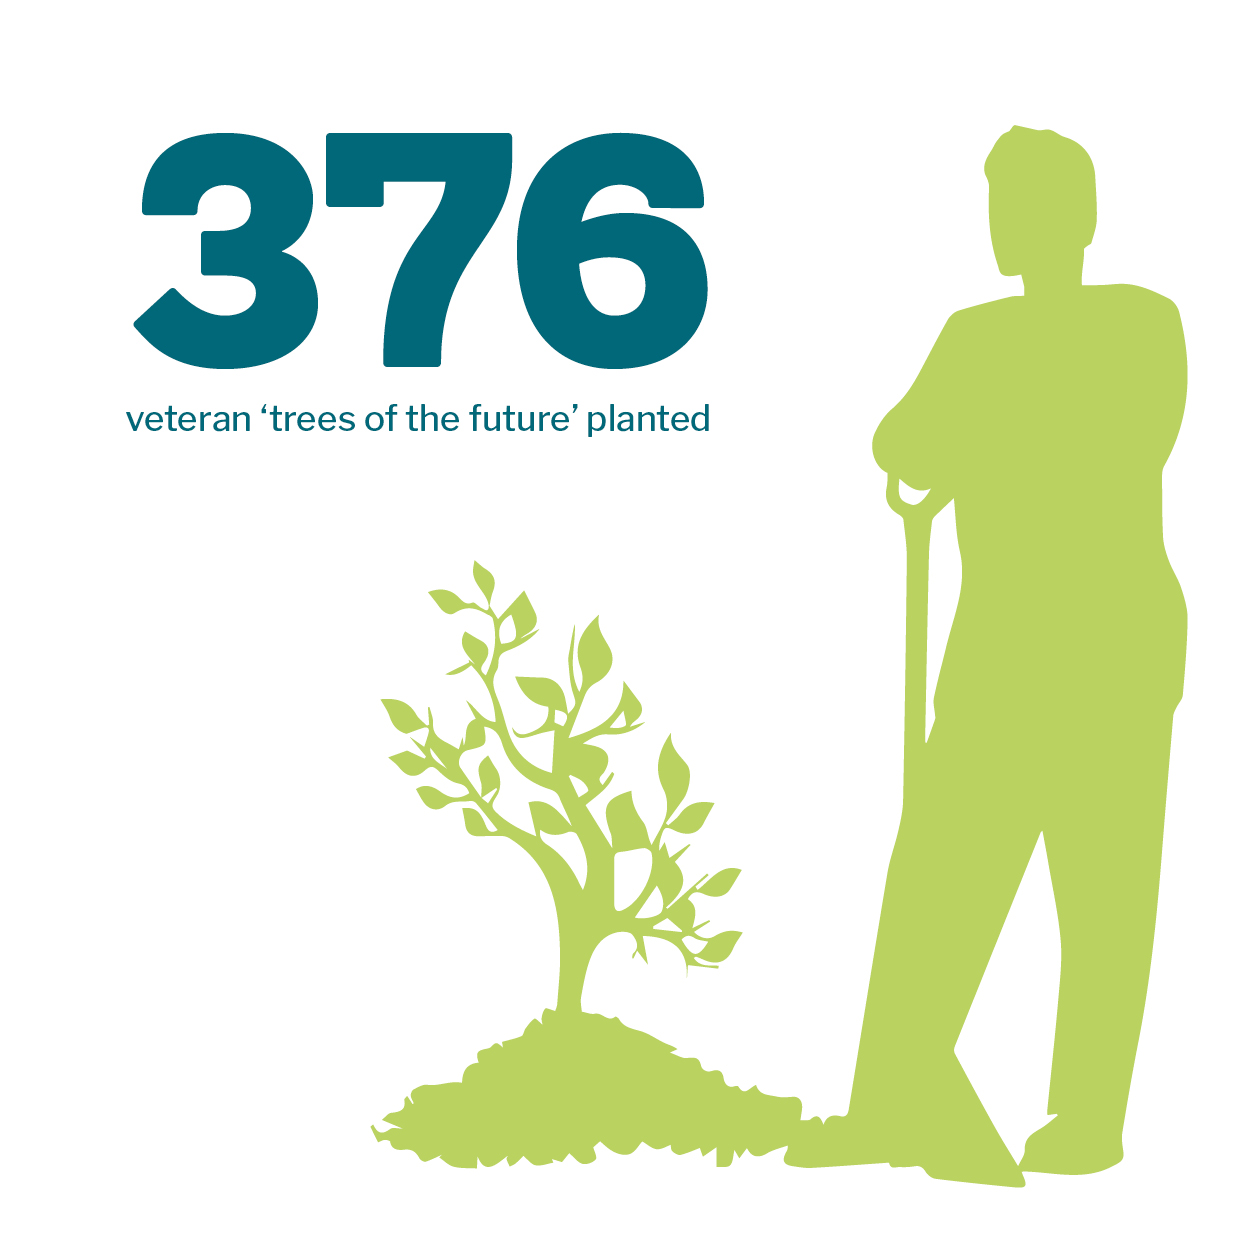 Tree planting infographic that reads 376 veteran trees of the future planted